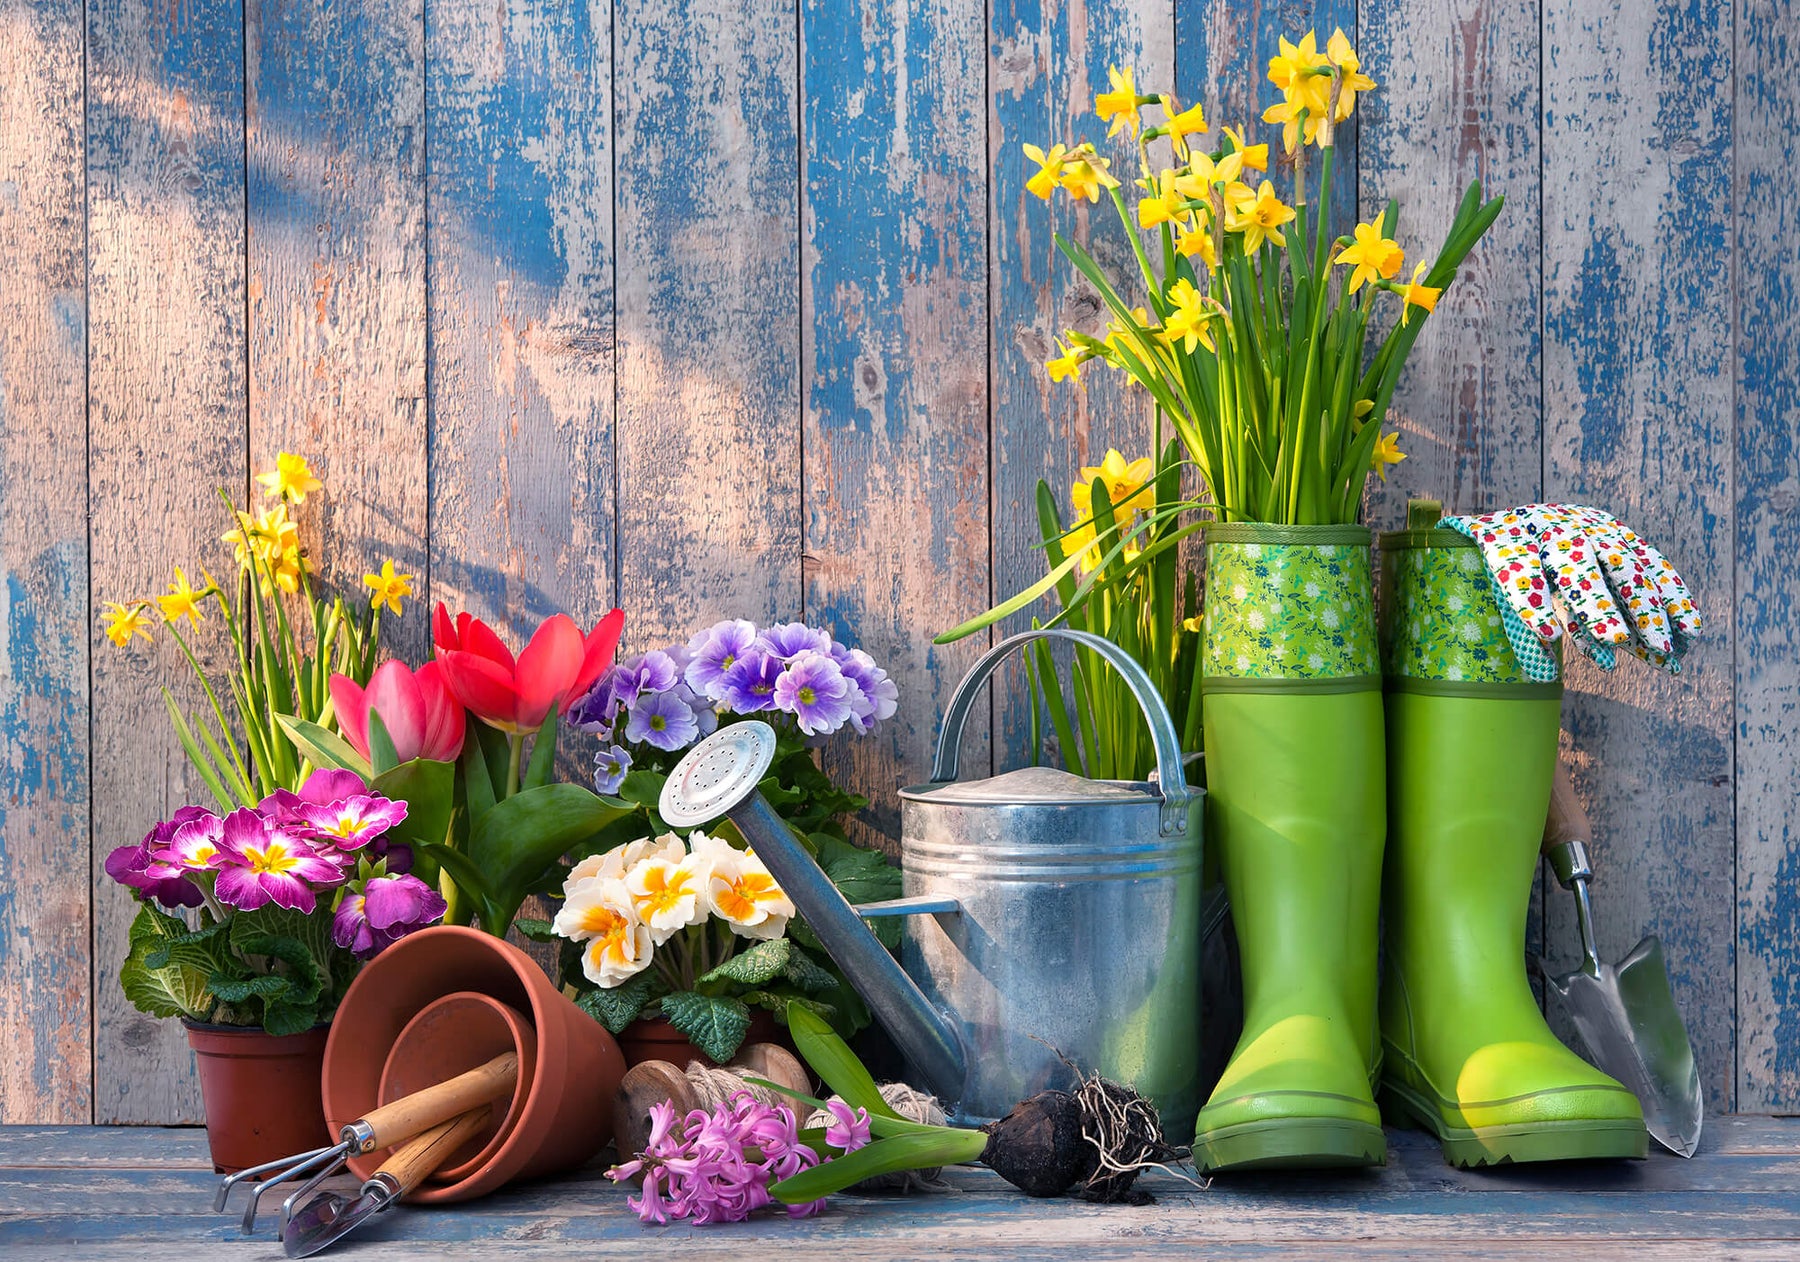 Get your Yard Spring Ready with These Seven Simple Steps